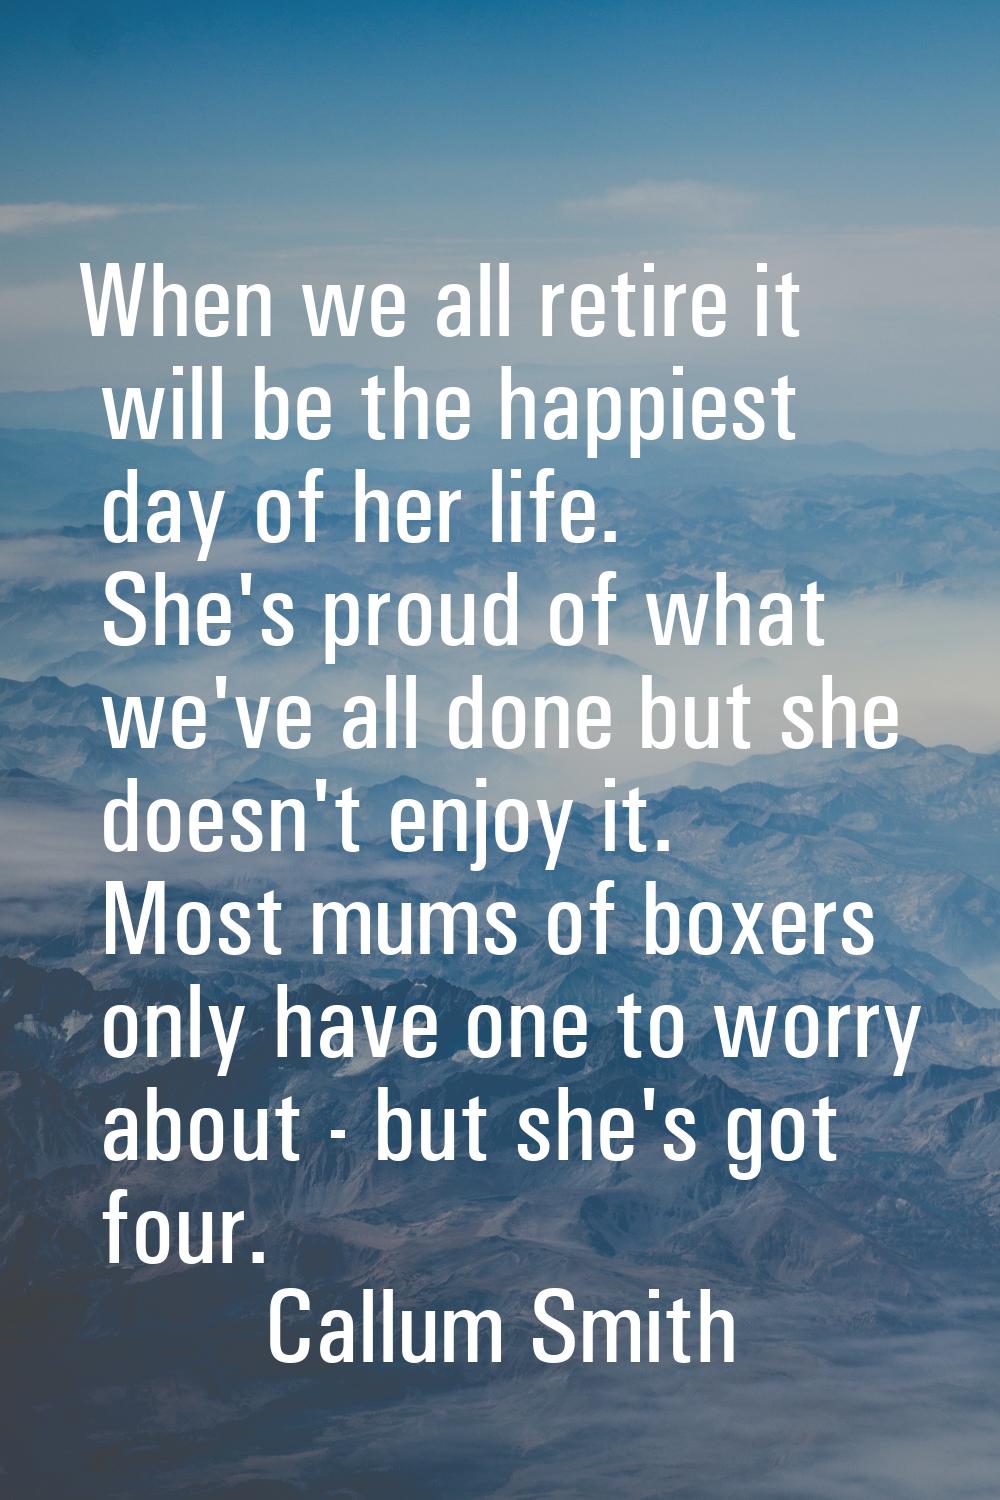 When we all retire it will be the happiest day of her life. She's proud of what we've all done but 